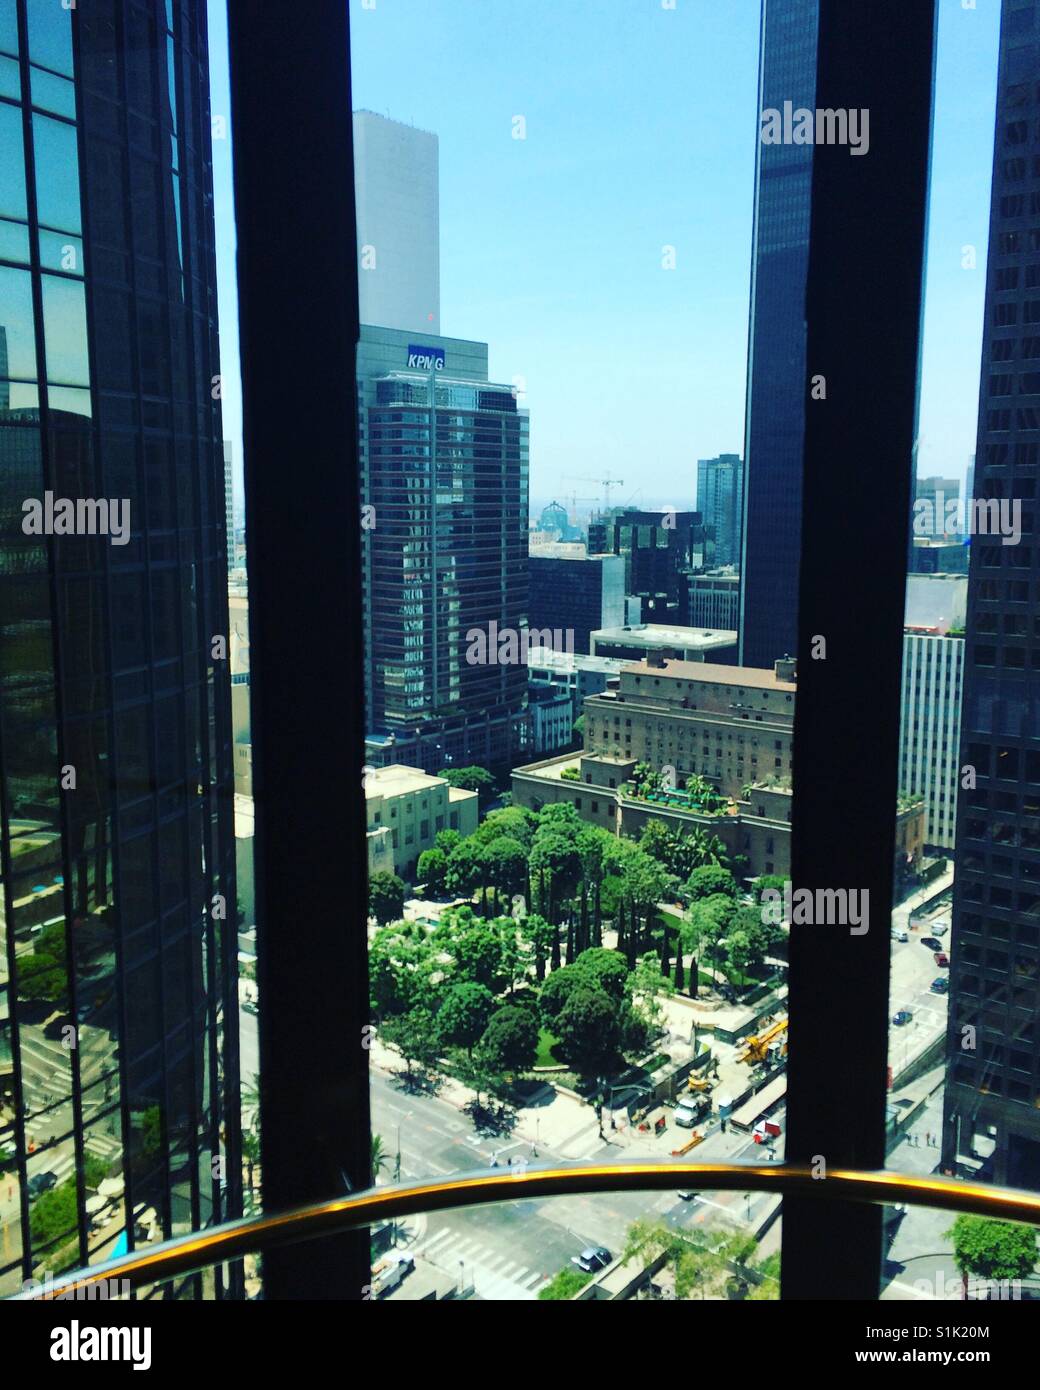 A view from one of the elevators at the Westin Bonaventure Hotel, Los Angeles, California, United States Stock Photo